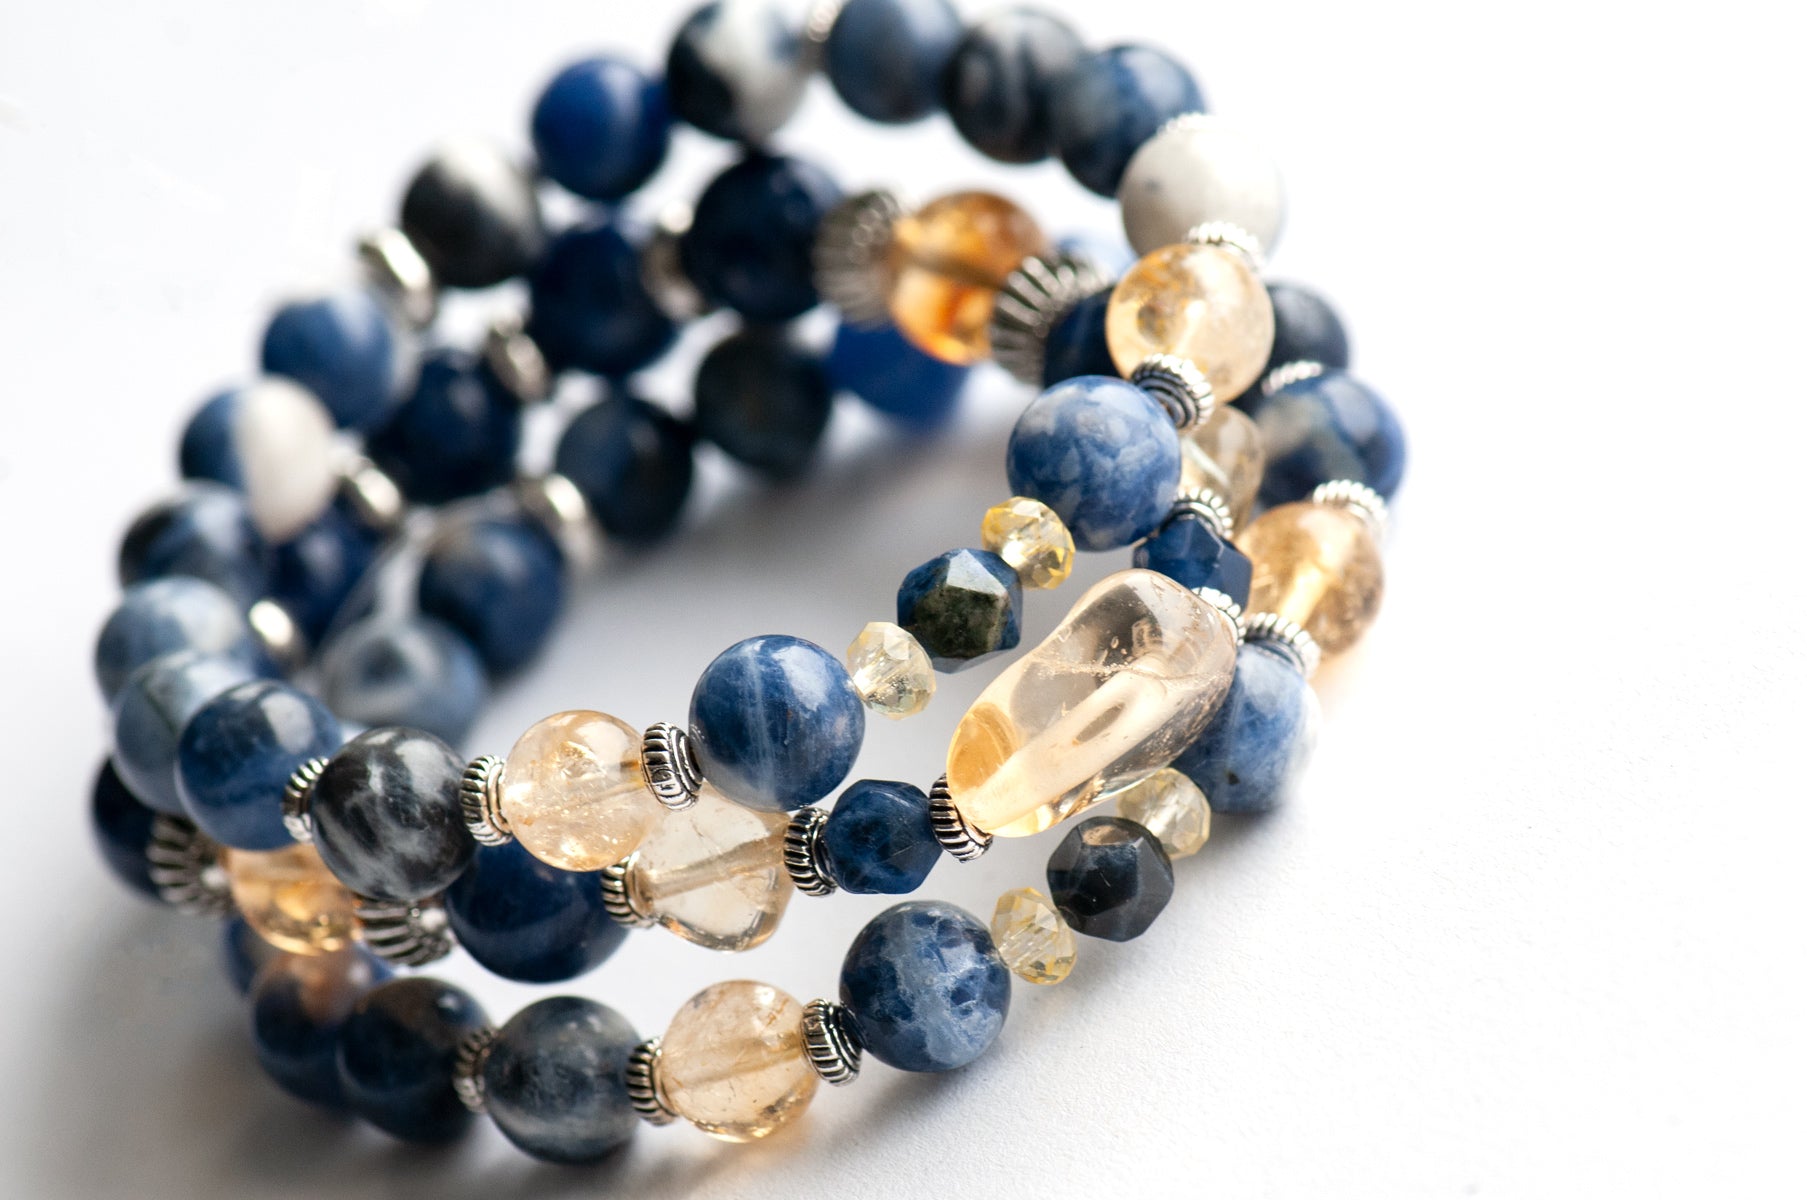 Blue and yellow stone bracelet set featuring sodalite and citrine